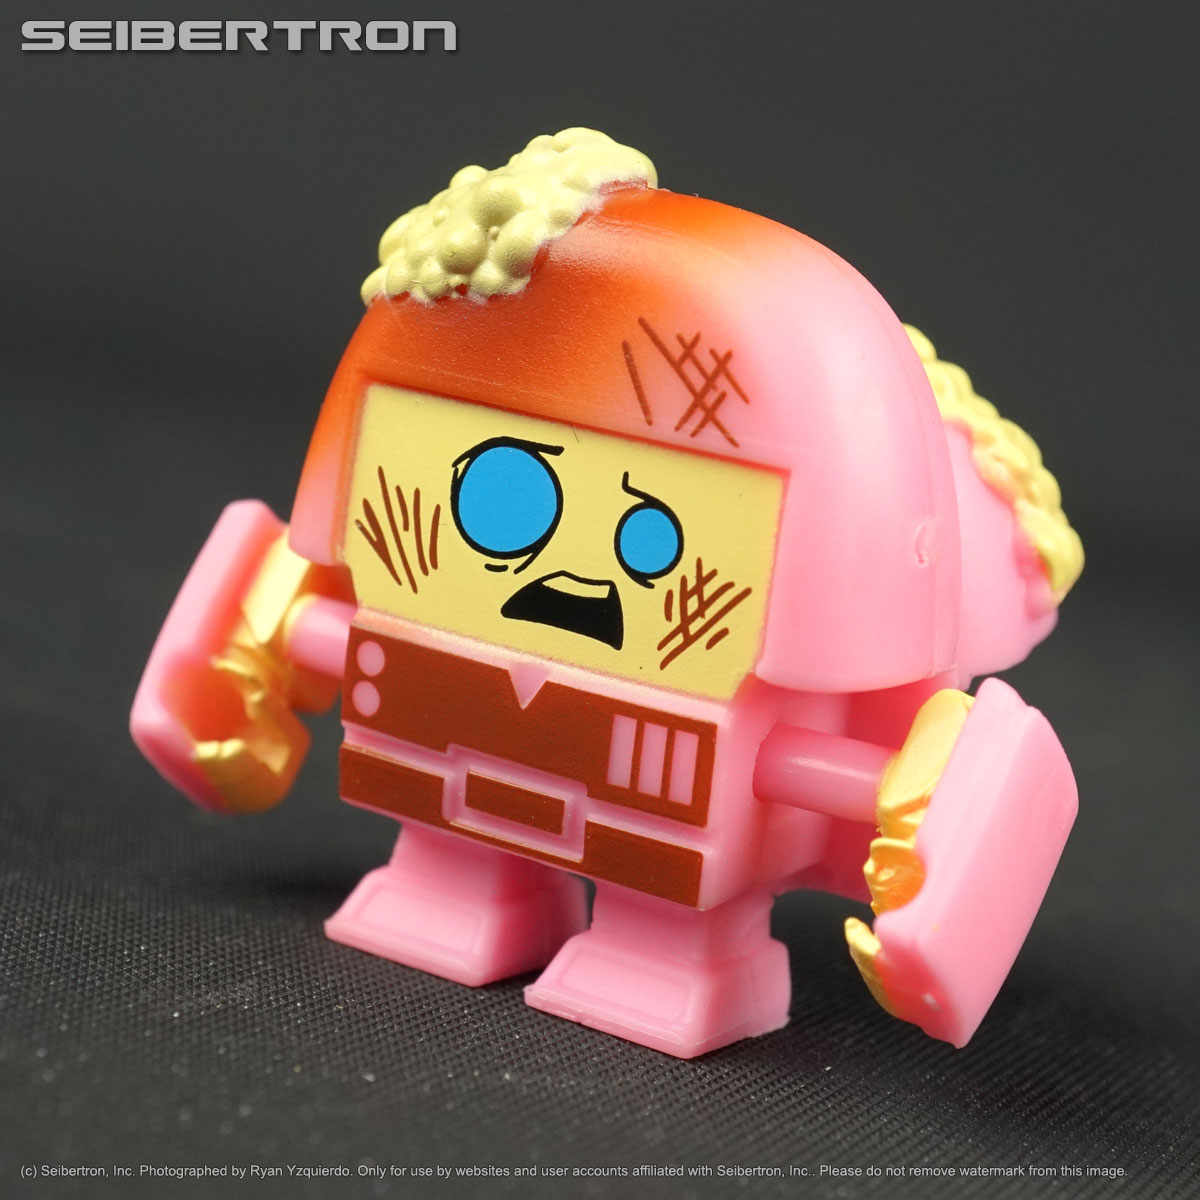 Transformers, Masters of the Universe, Teenage Mutant Ninja Turtles, Gobots, Comic Books, Shopkins, and other listings from Seibertron.com: NOPE SOAP Transformers BotBots Series 2 Toilet Troop 2019 used bar soap